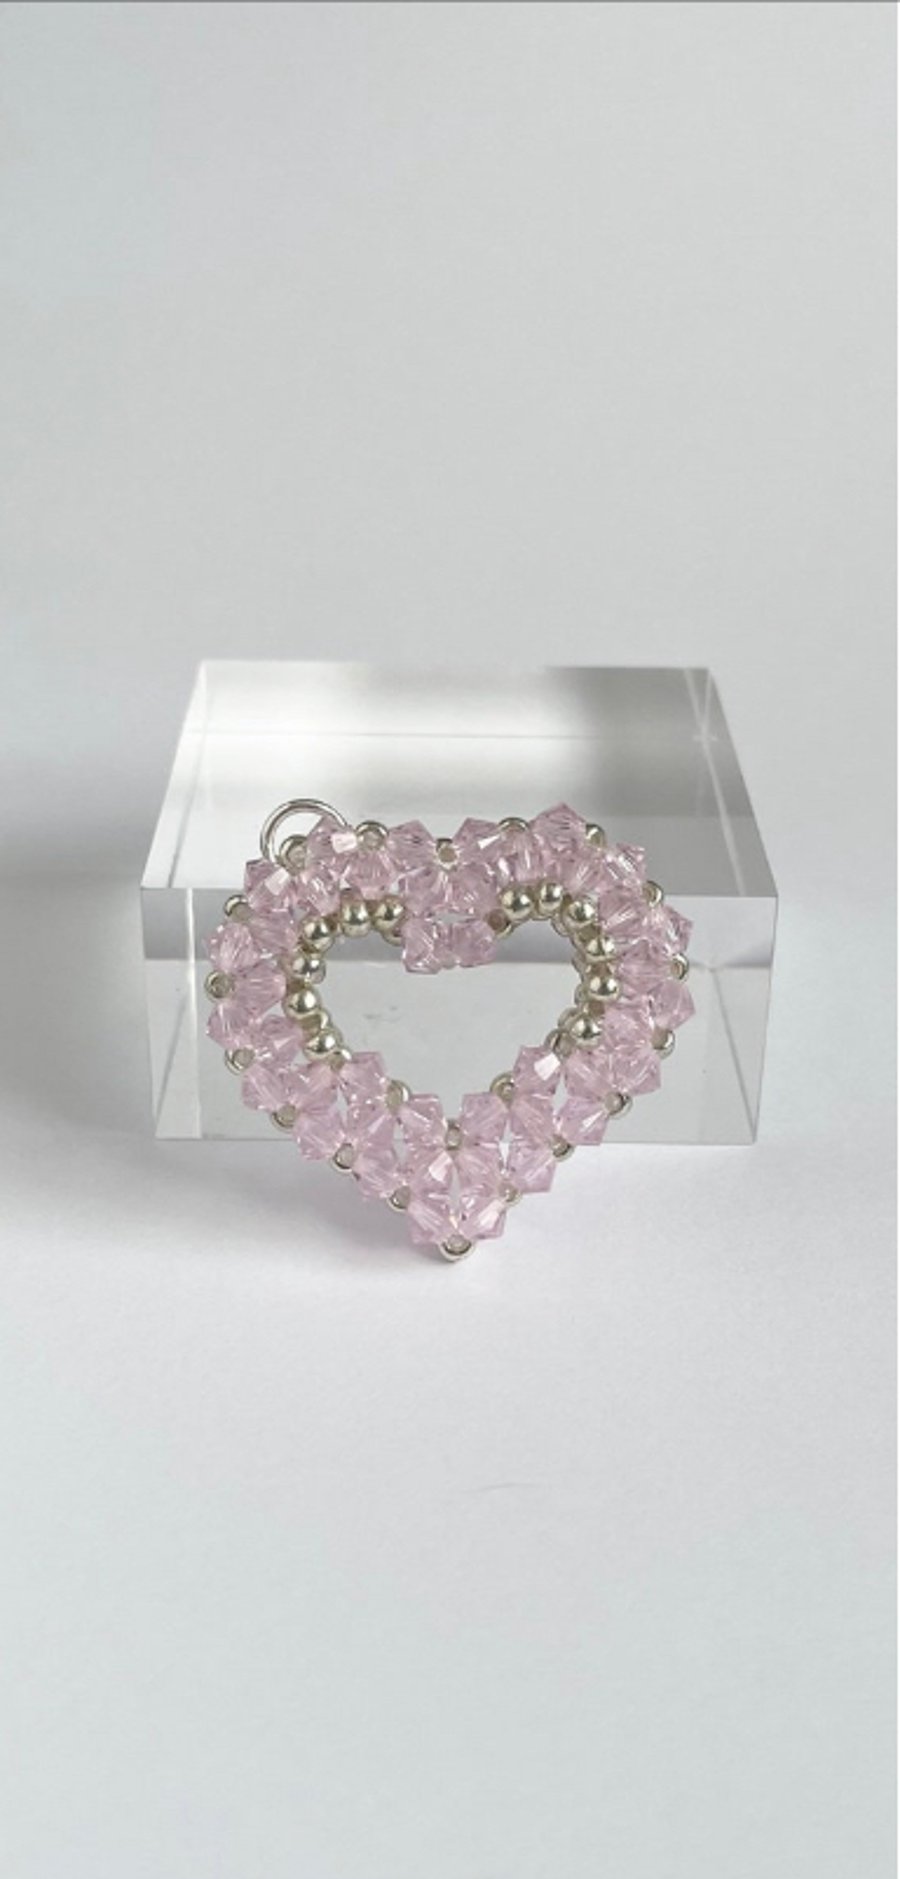 Pink Crystal Open Heart Handbag Charm, with a Chainmaille Chain and Keyring